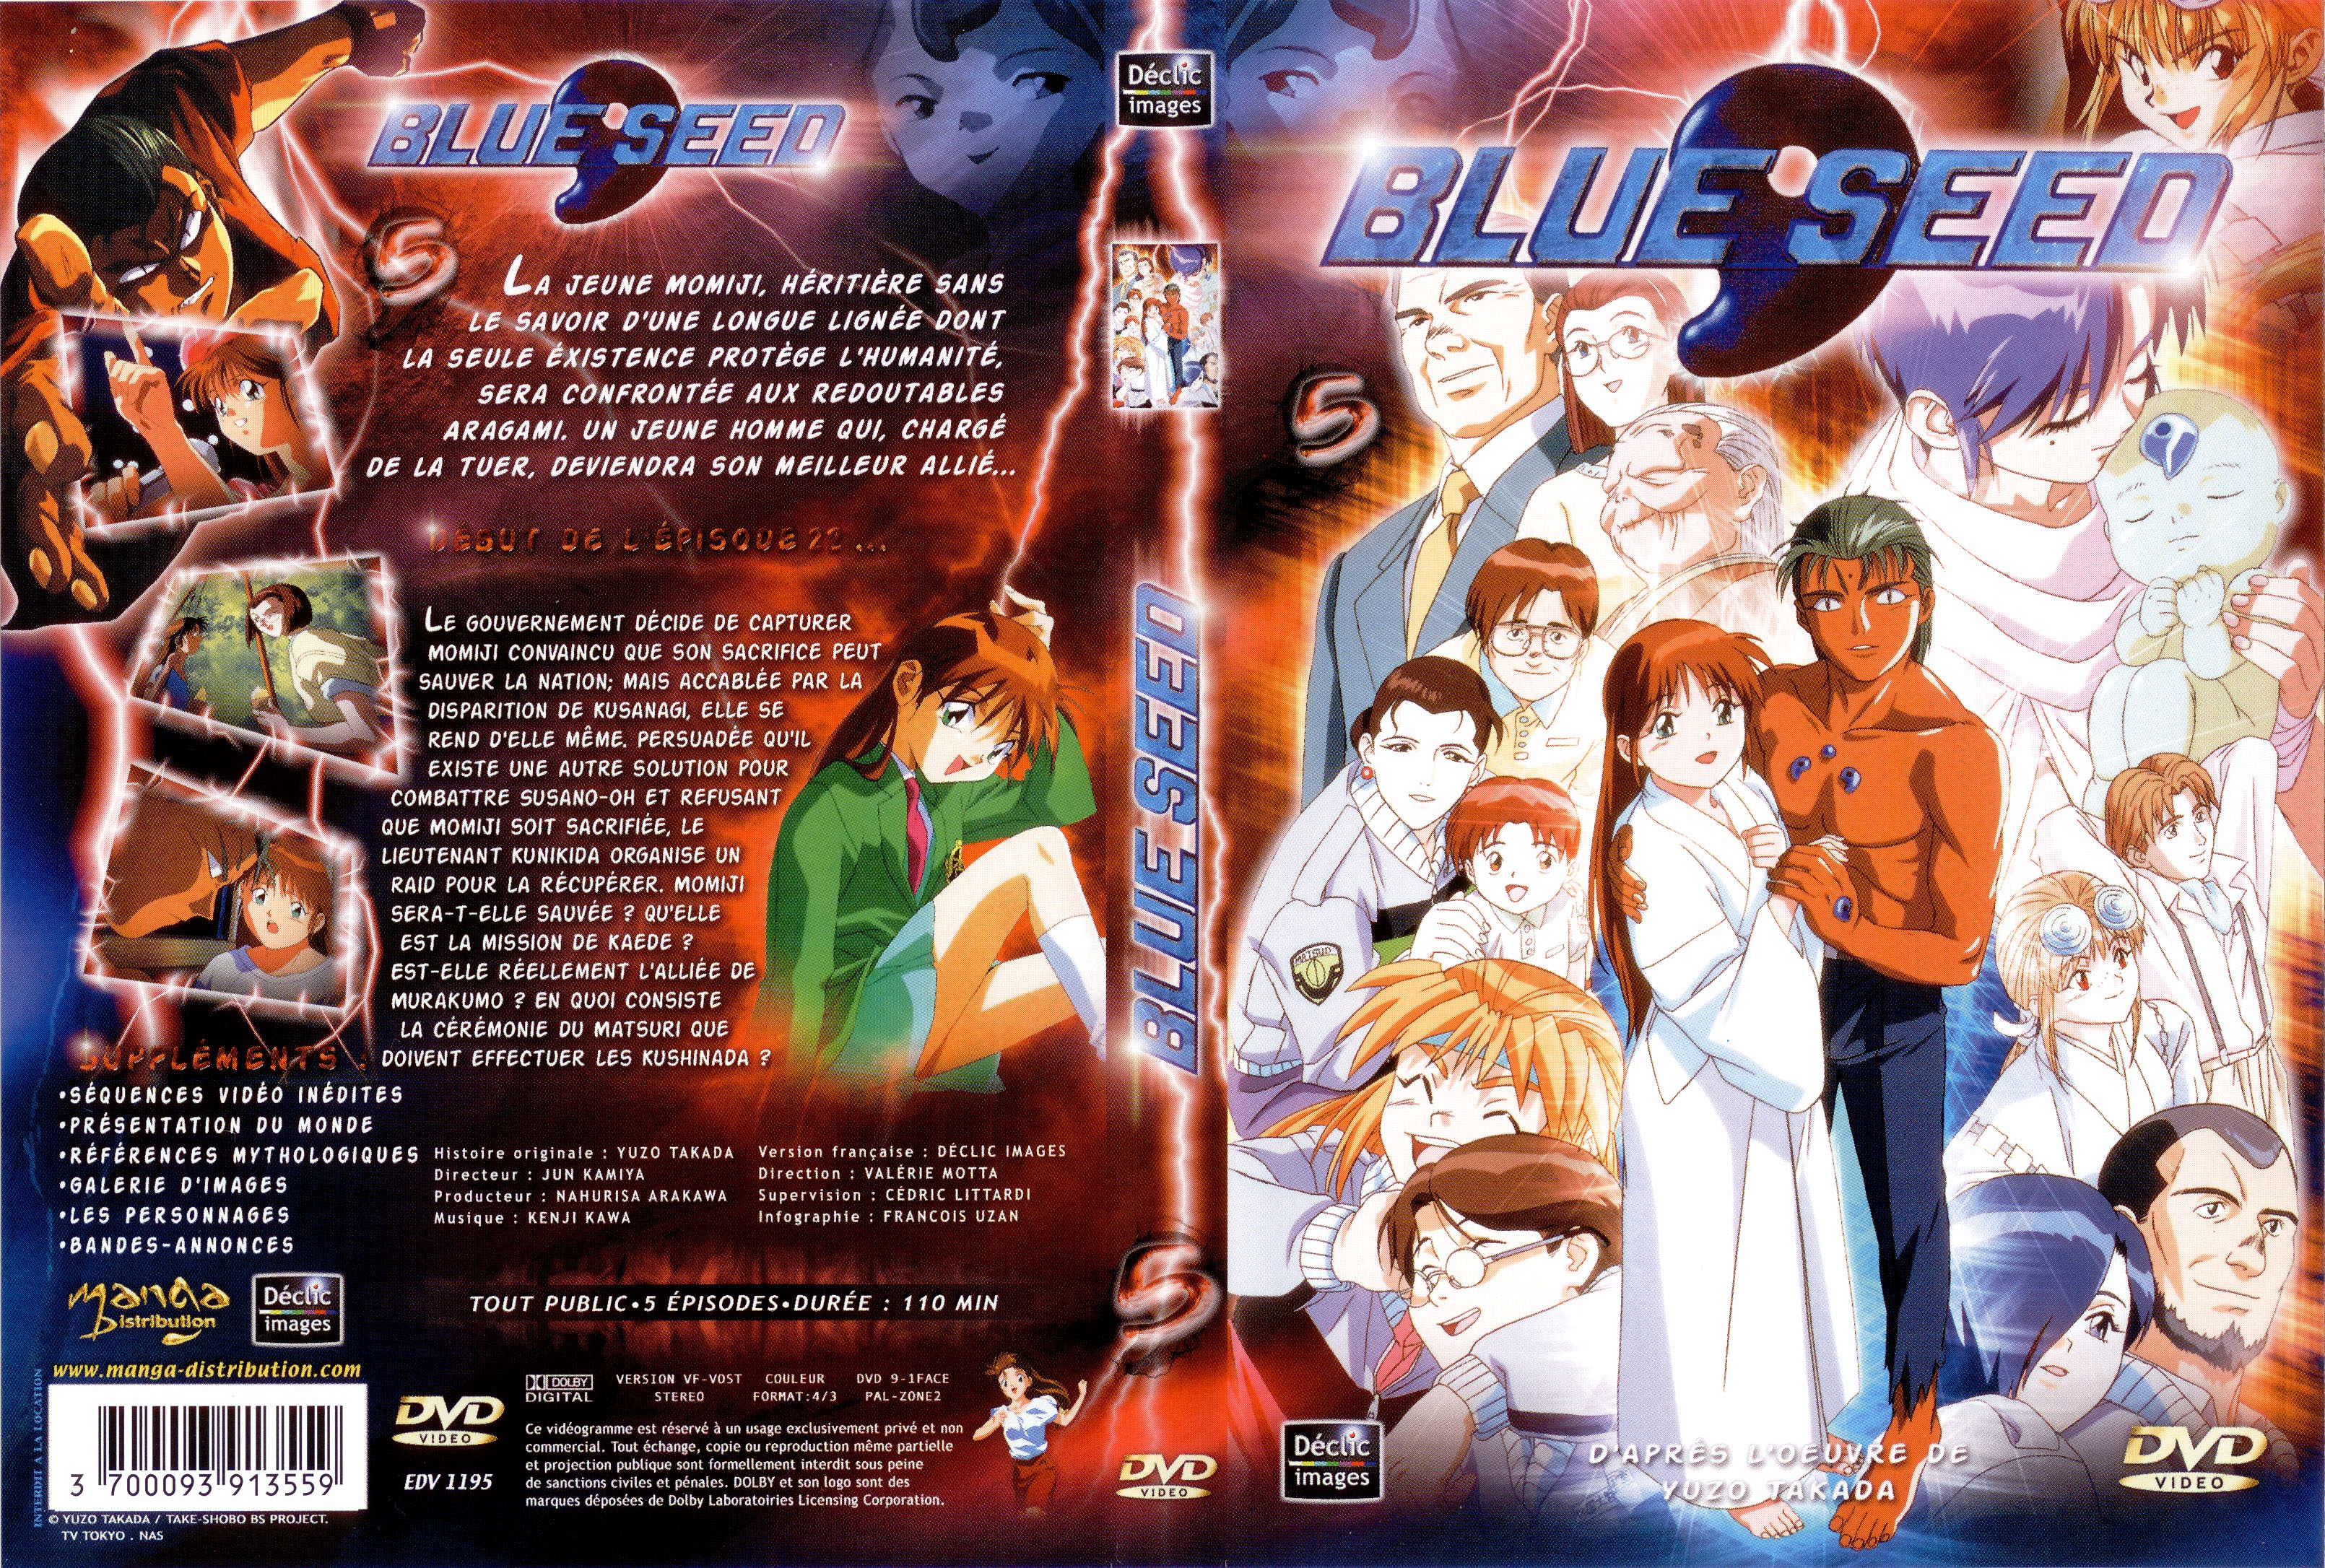 Jaquette DVD Blue seed vol 5